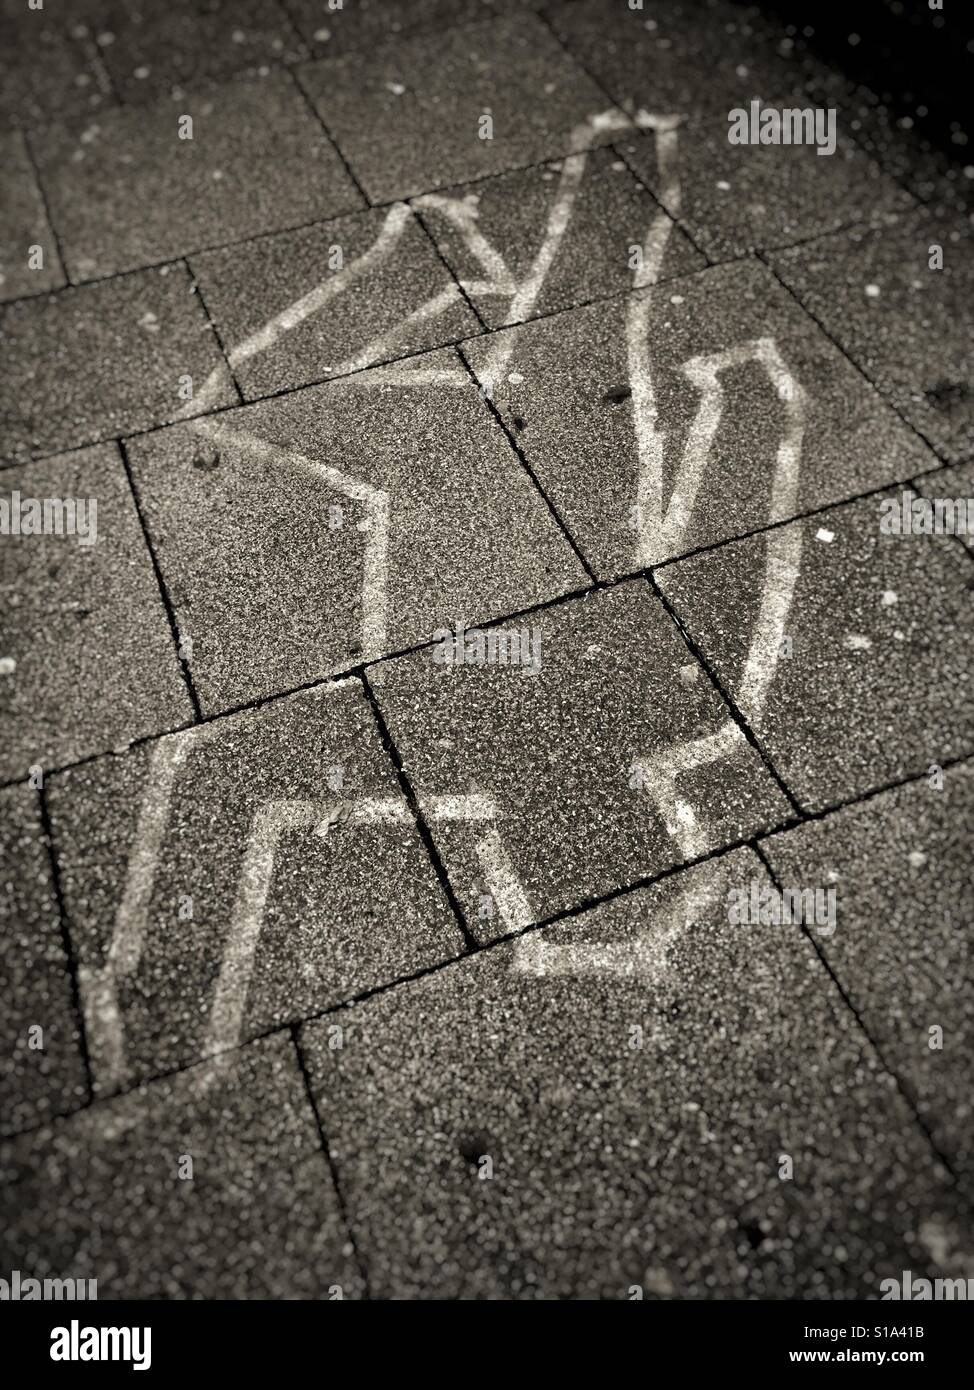 Chalk outline of body on the pavement Stock Photo